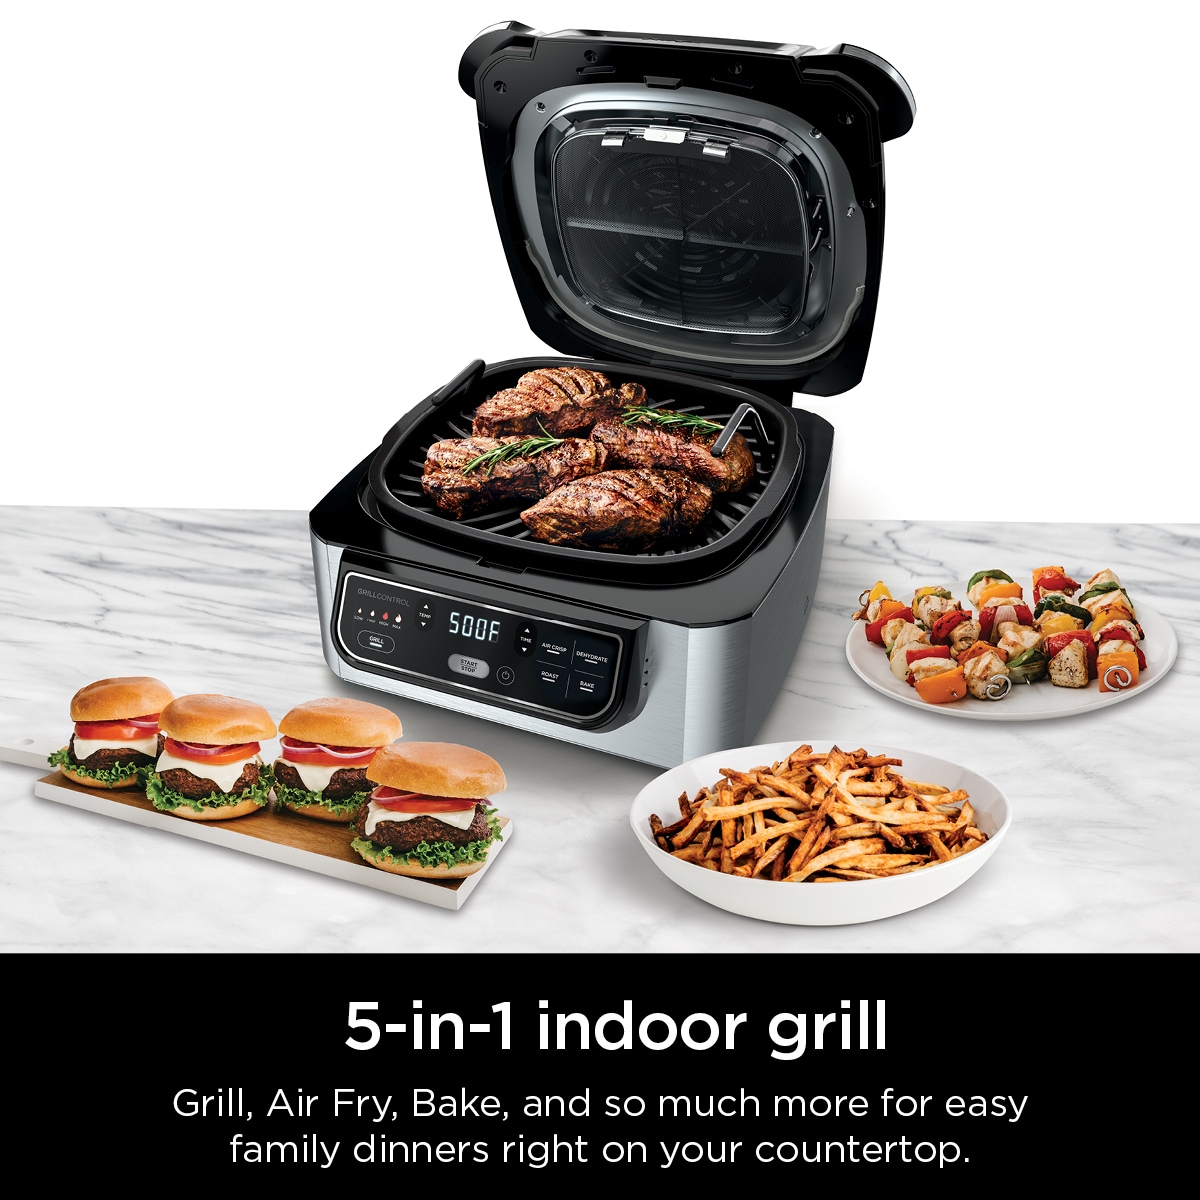 Ninja Foodi 5-in-1 Indoor Grill and Air Fryer 10-in L x 10-in W